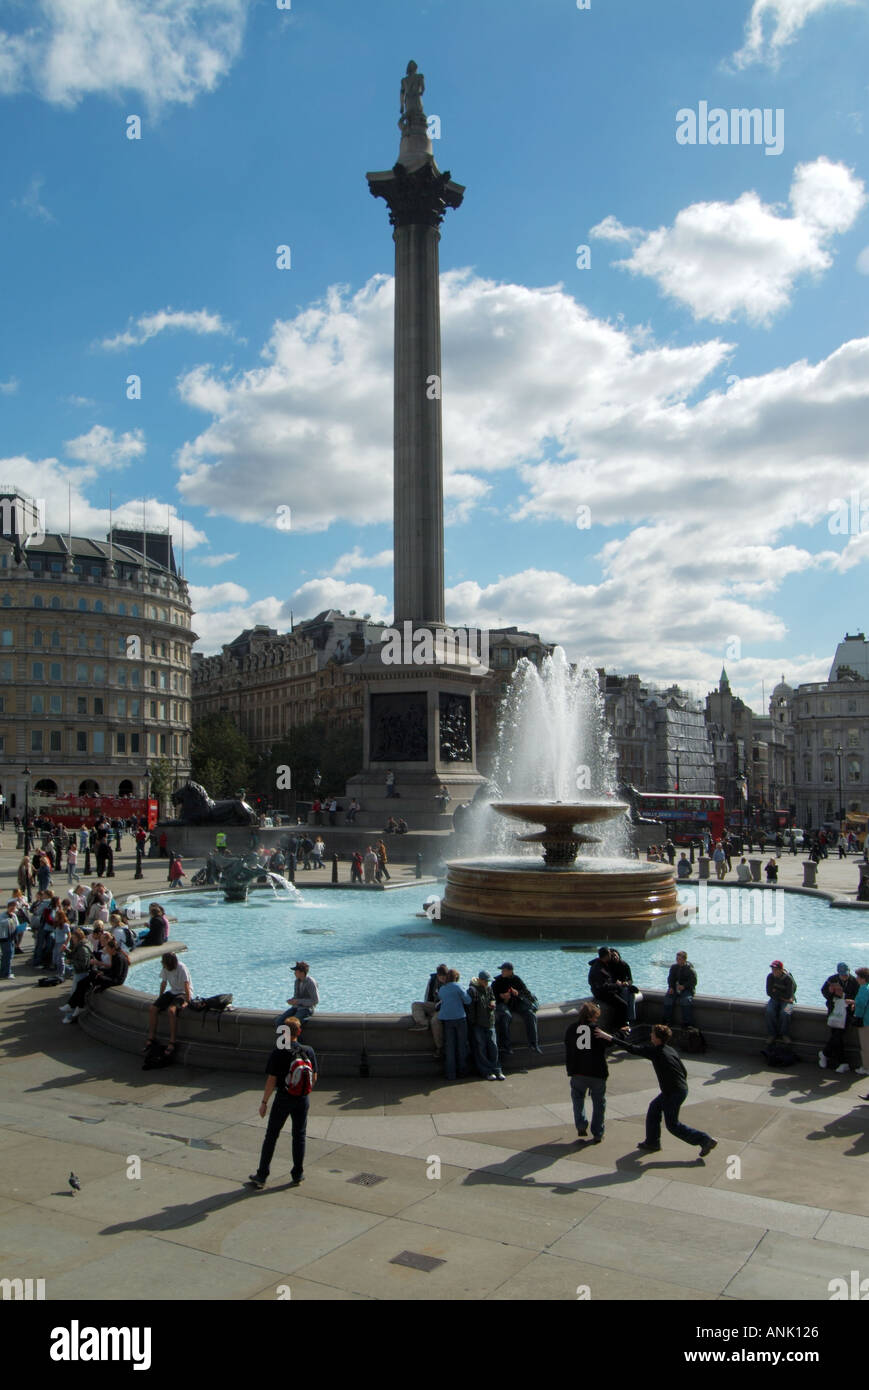 Tourists in Trafalgar Square historical landmark Nelsons Column with fountain water feature sunny blue sky day in London street scene England UK Stock Photo